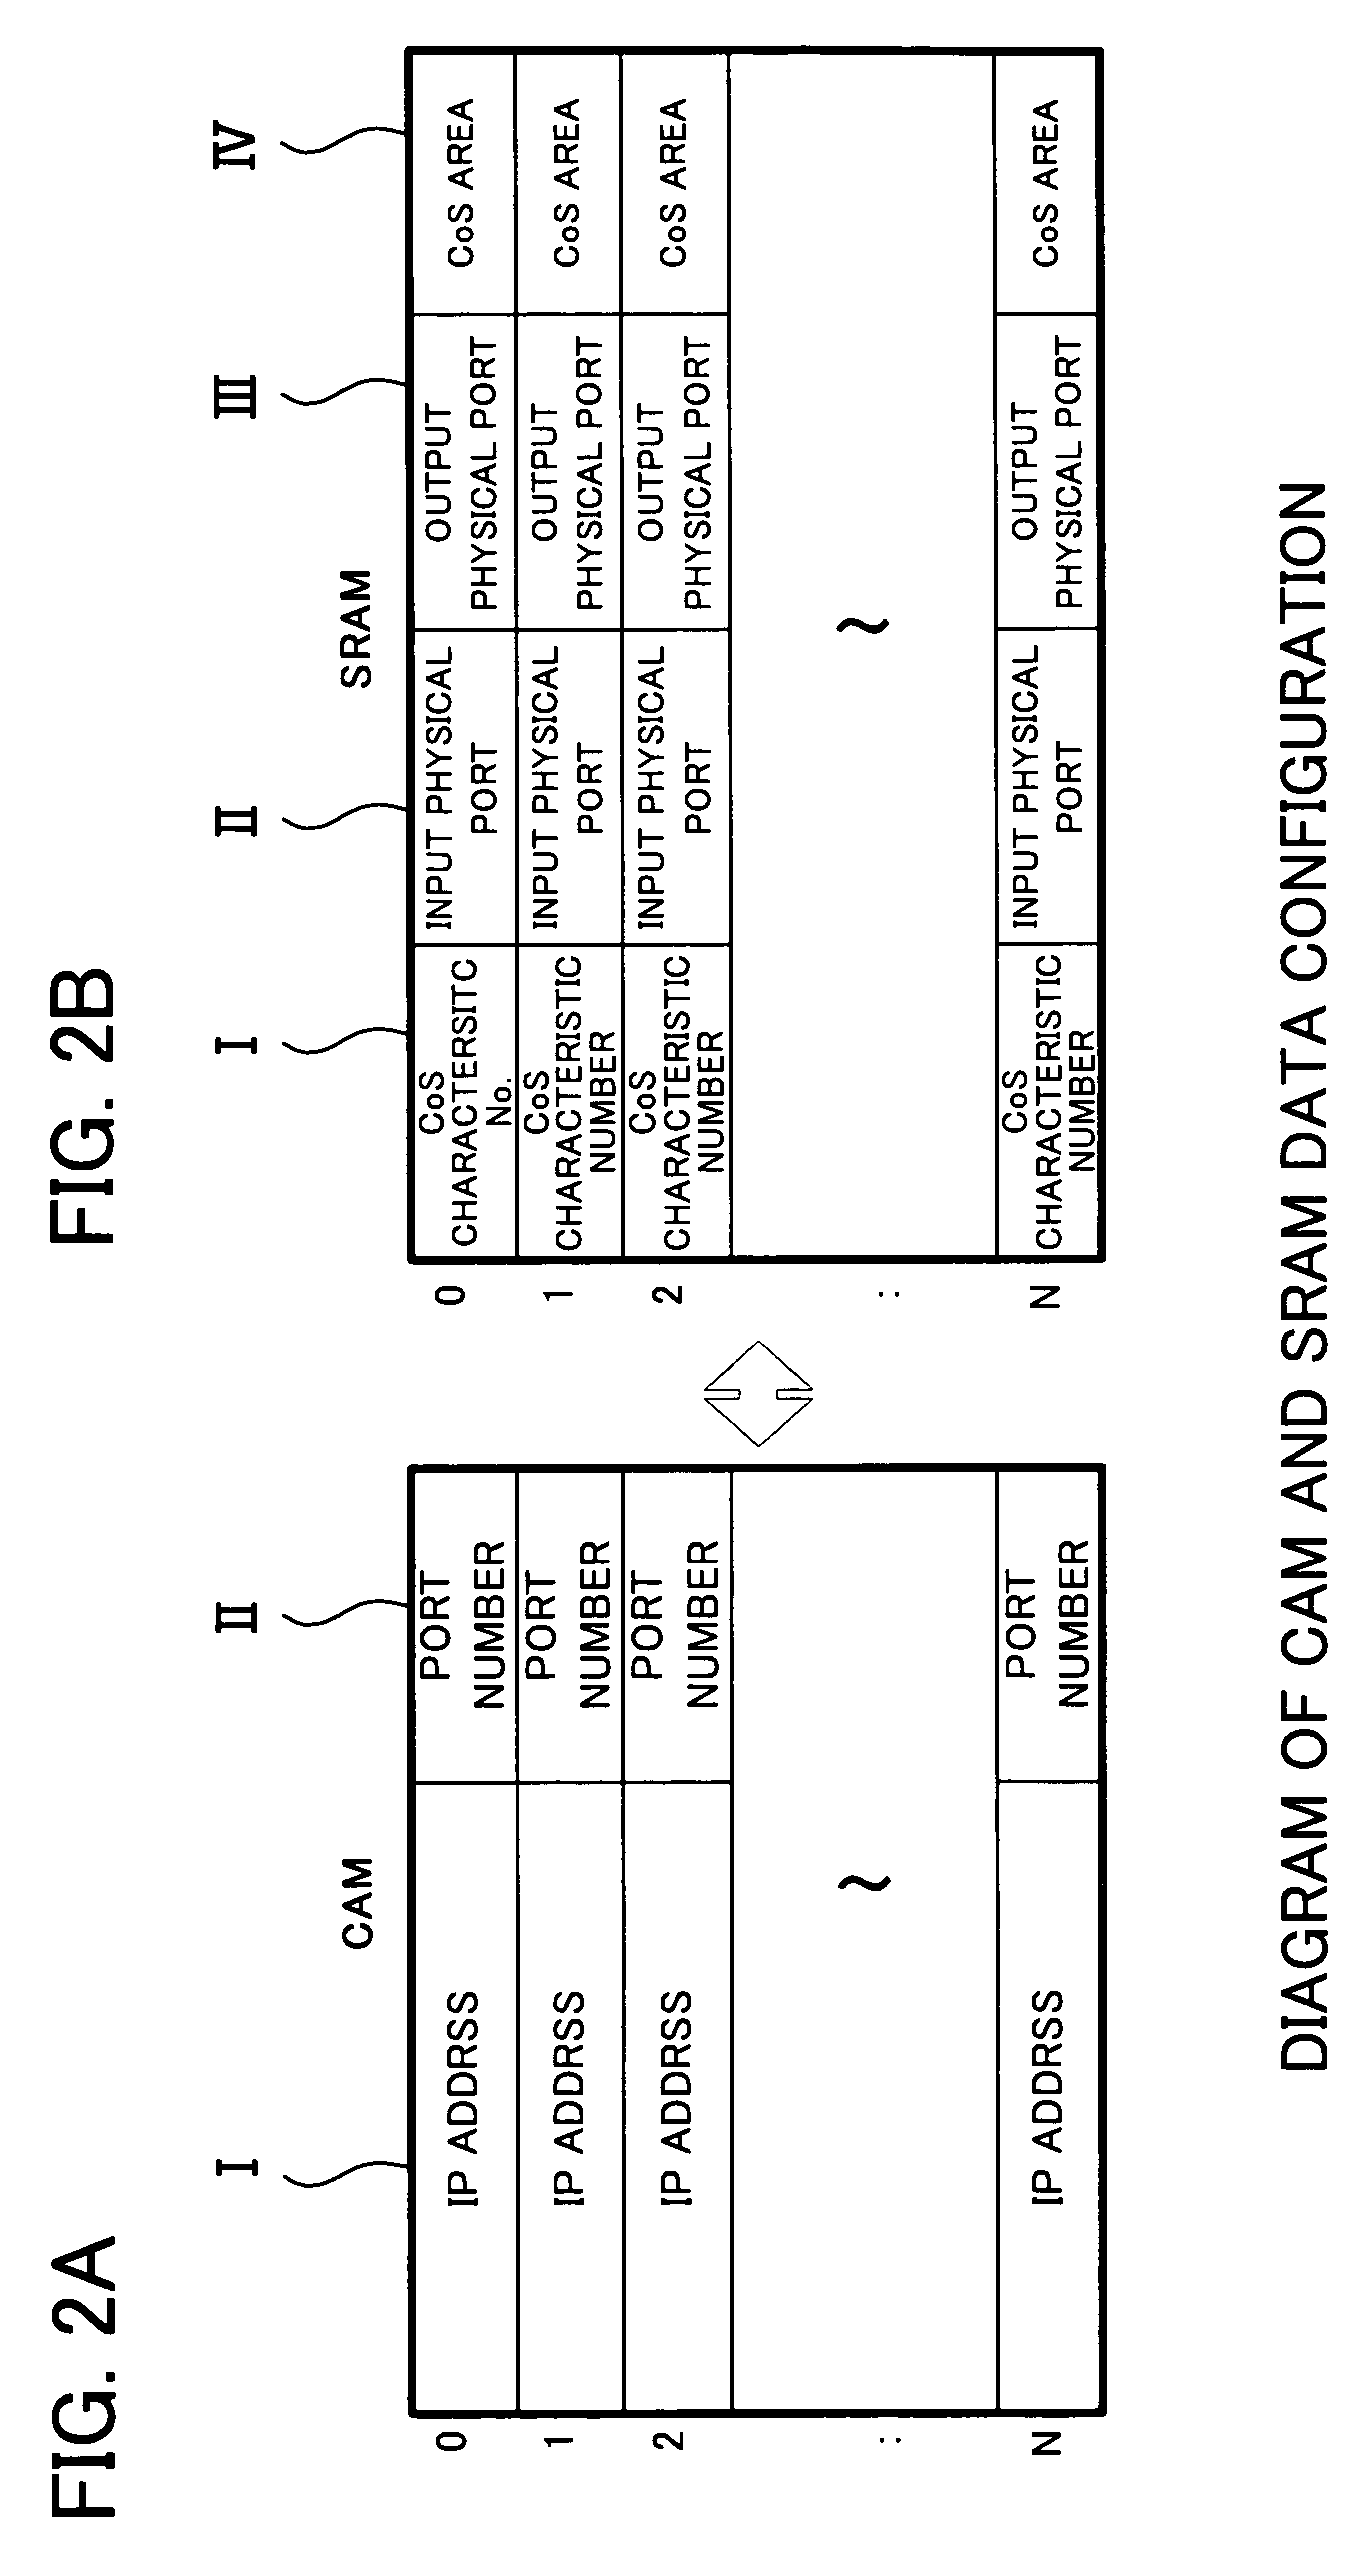 Buffer memory management method and system